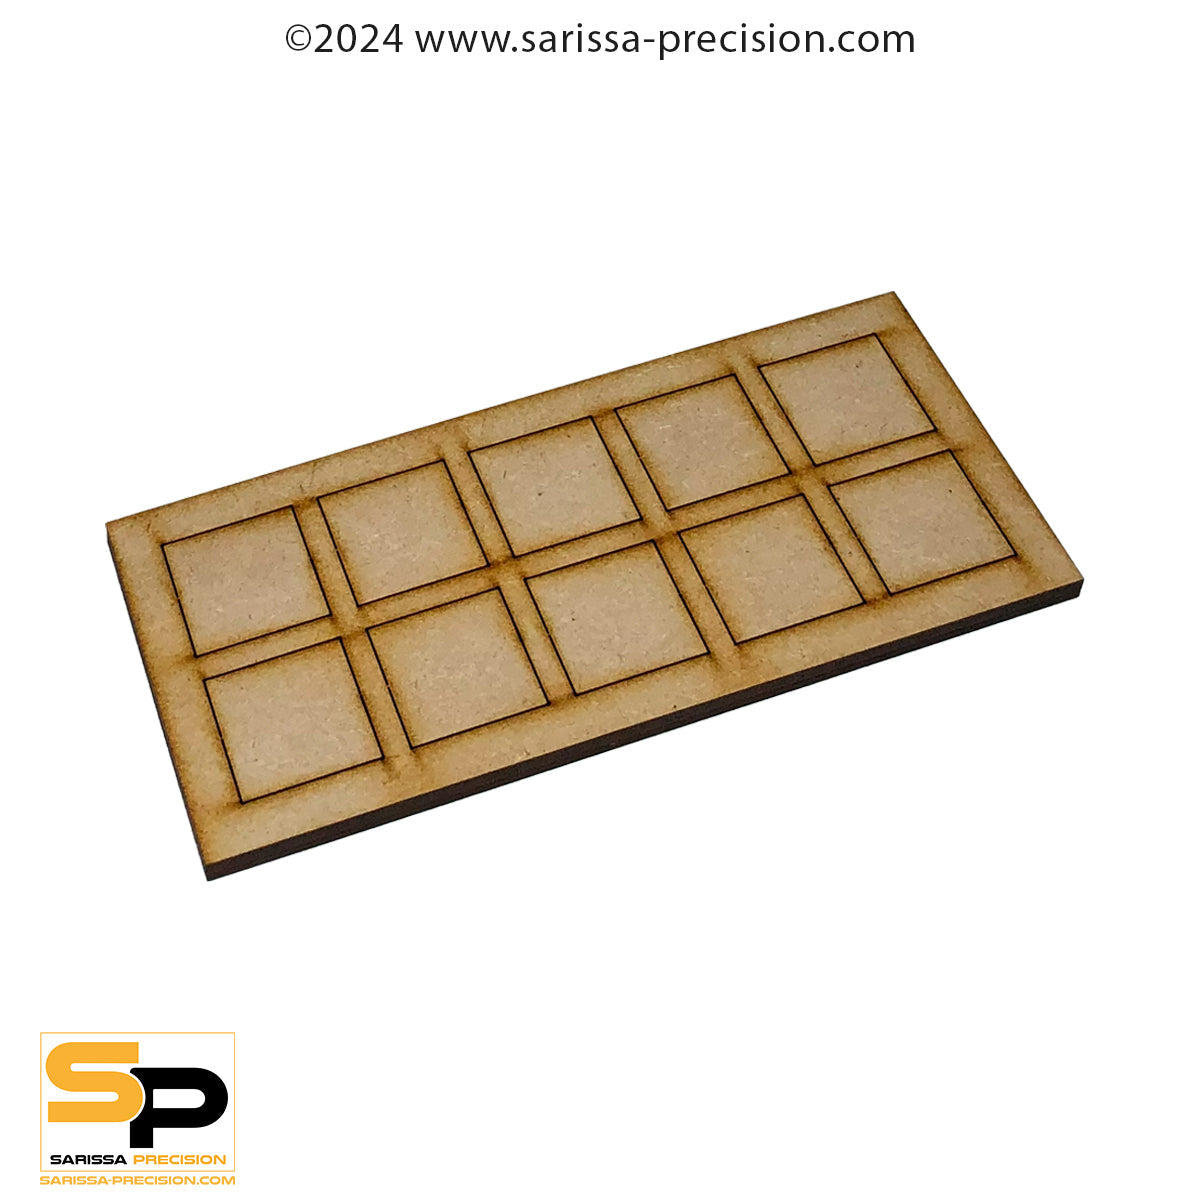 12 x 7 30x30mm Conversion Tray for 25x25mm bases